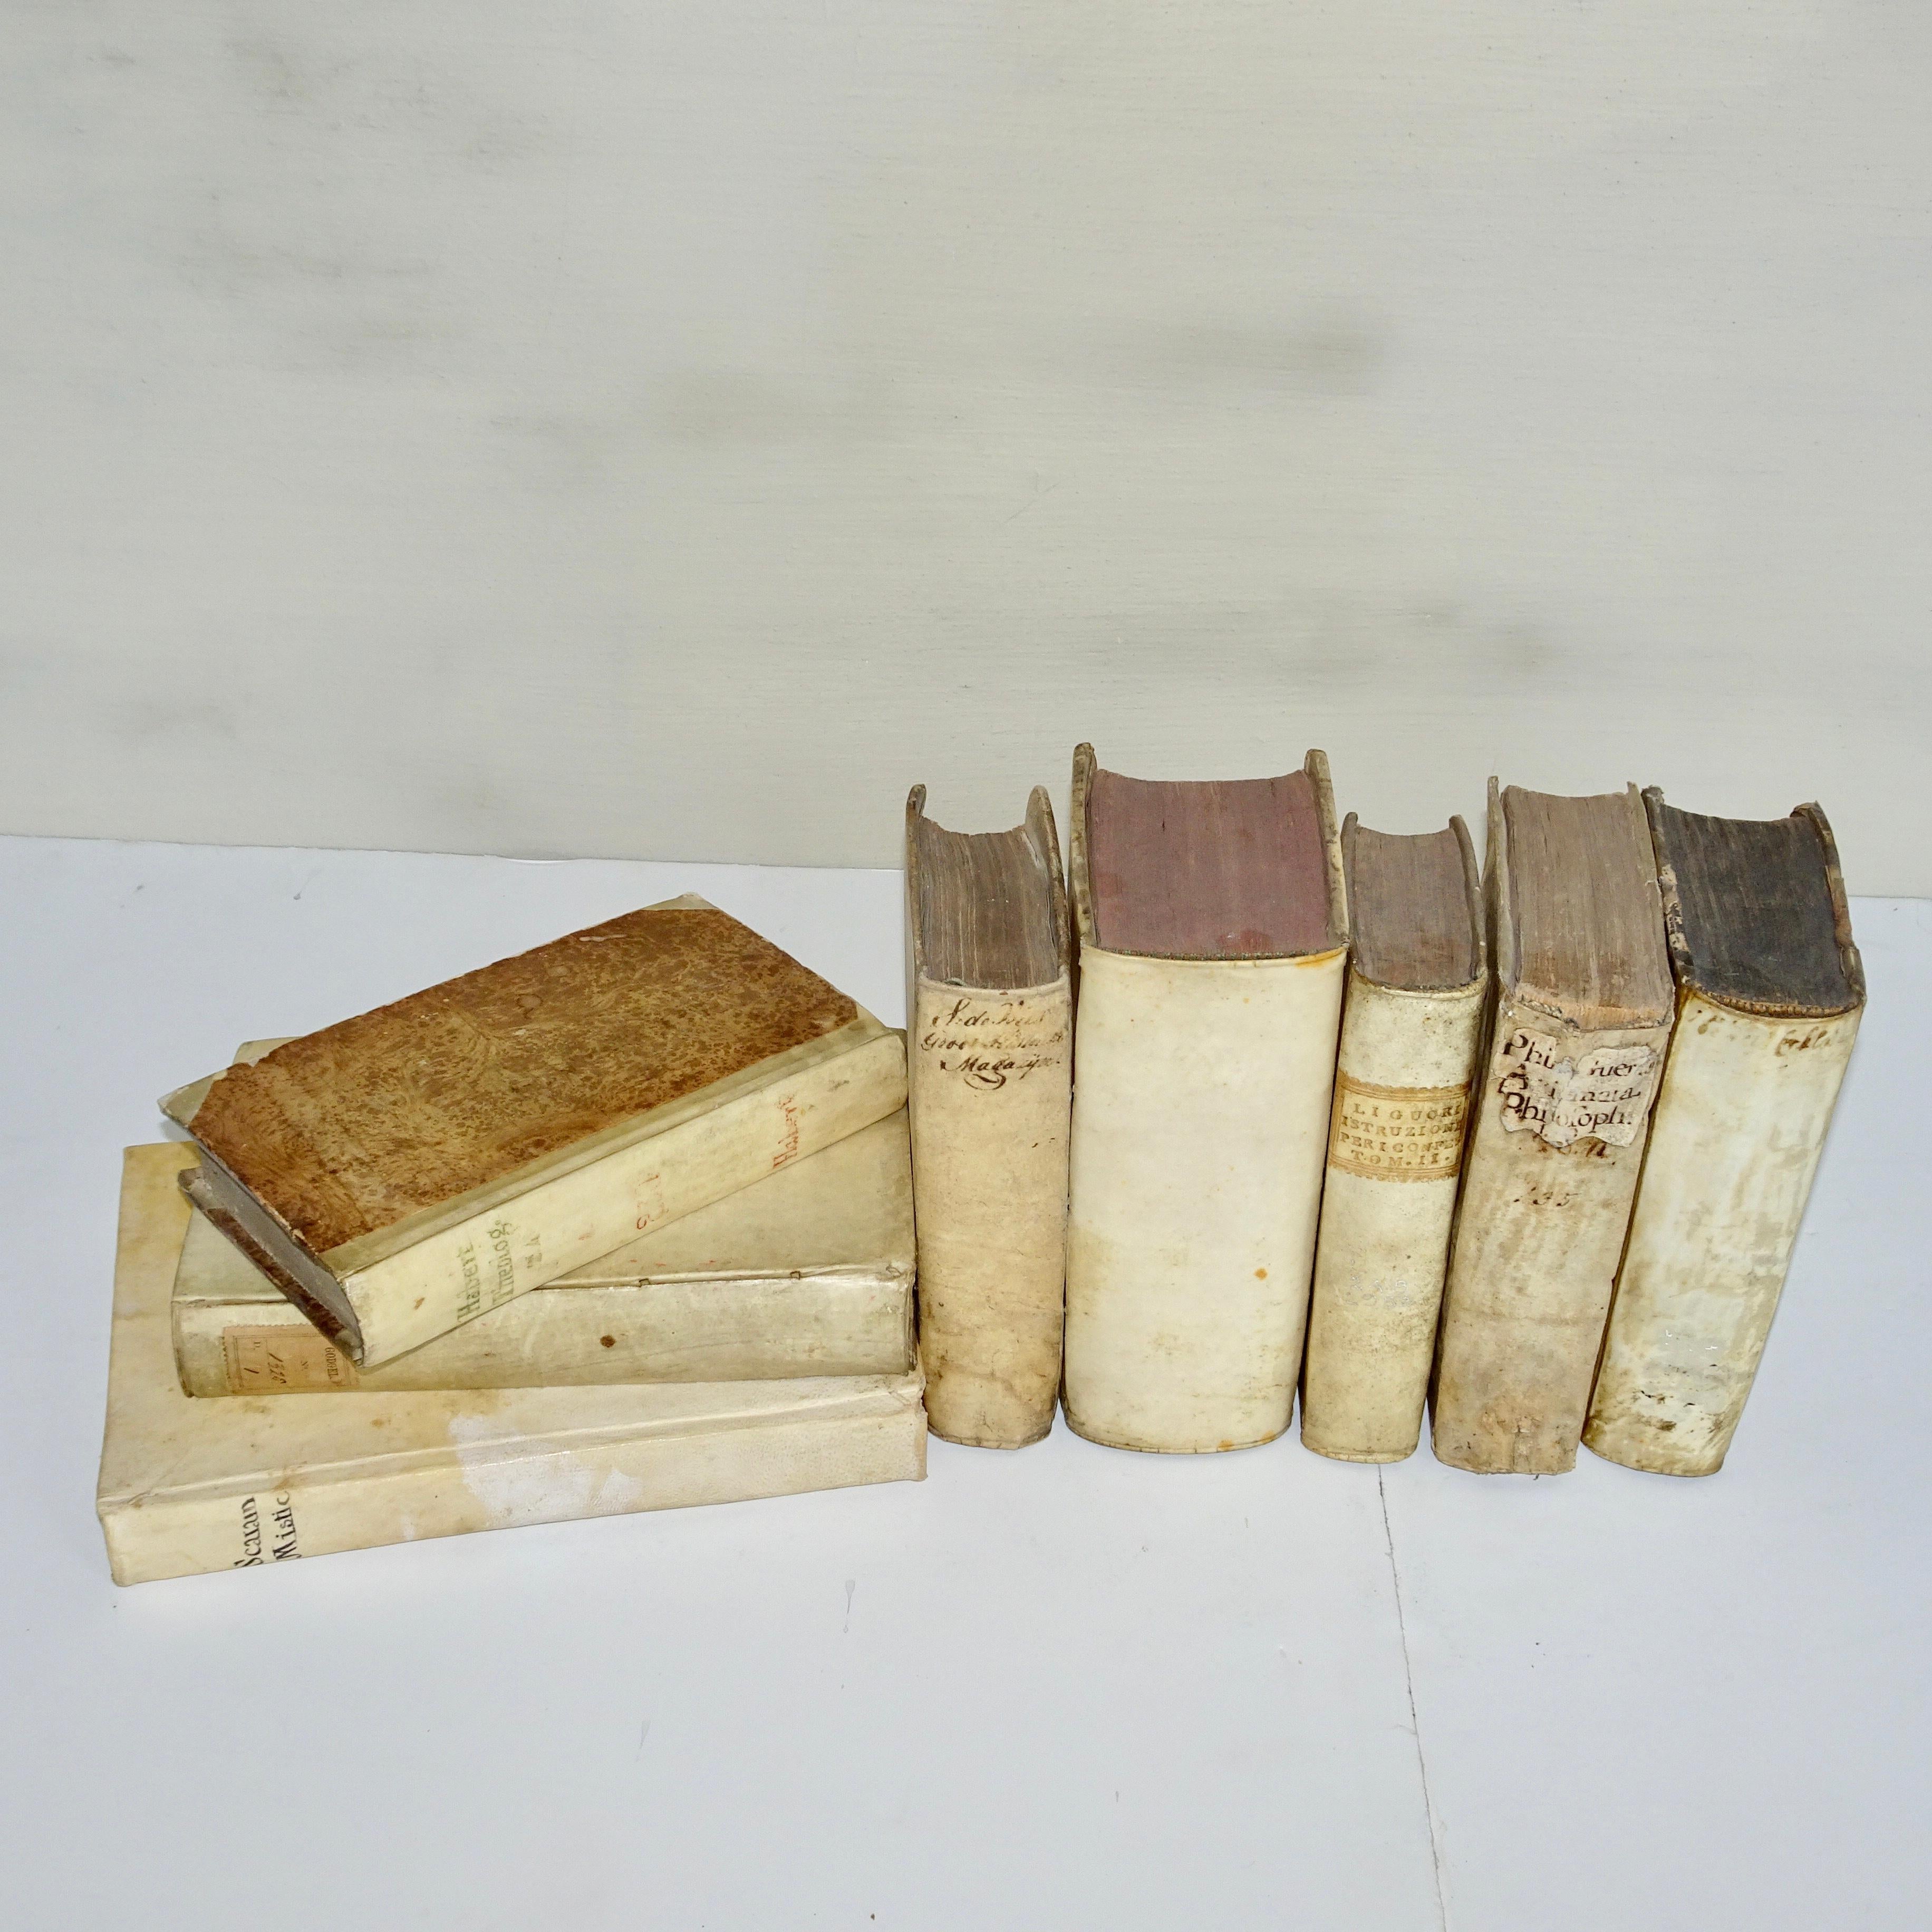 A very nice collection of vellum books from the 17th and 18th century in a set of eight books. All Vellum books on my site are on Sale